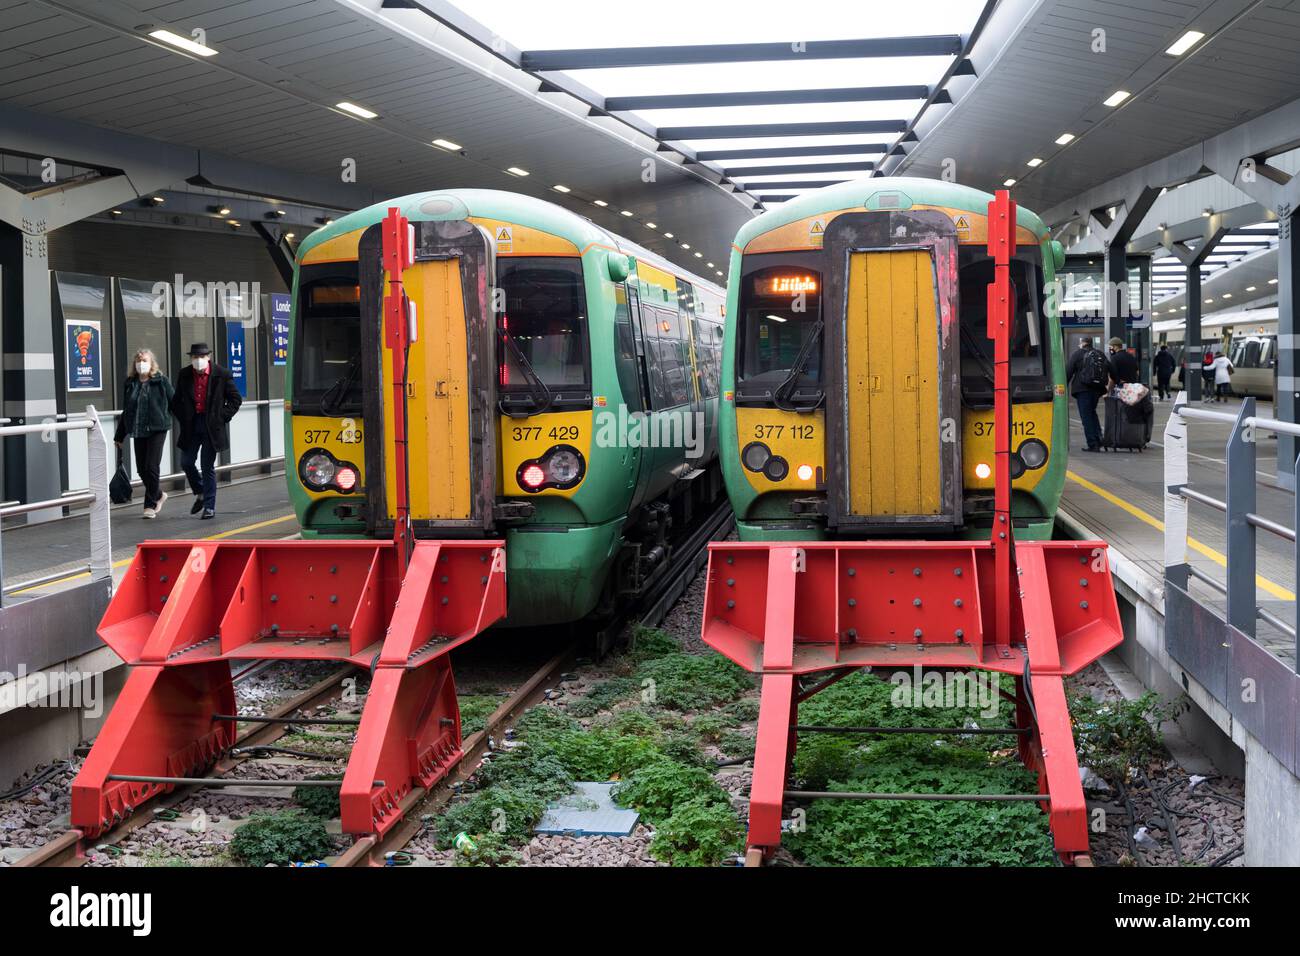 London UK, 1 January 2022. All Southern Rail services to and from London Victoria have been cancelled for two weeks over festive period until early January due to staff shortages or engineering work. Credit: Xiu Bao/Alamy Live News Stock Photo